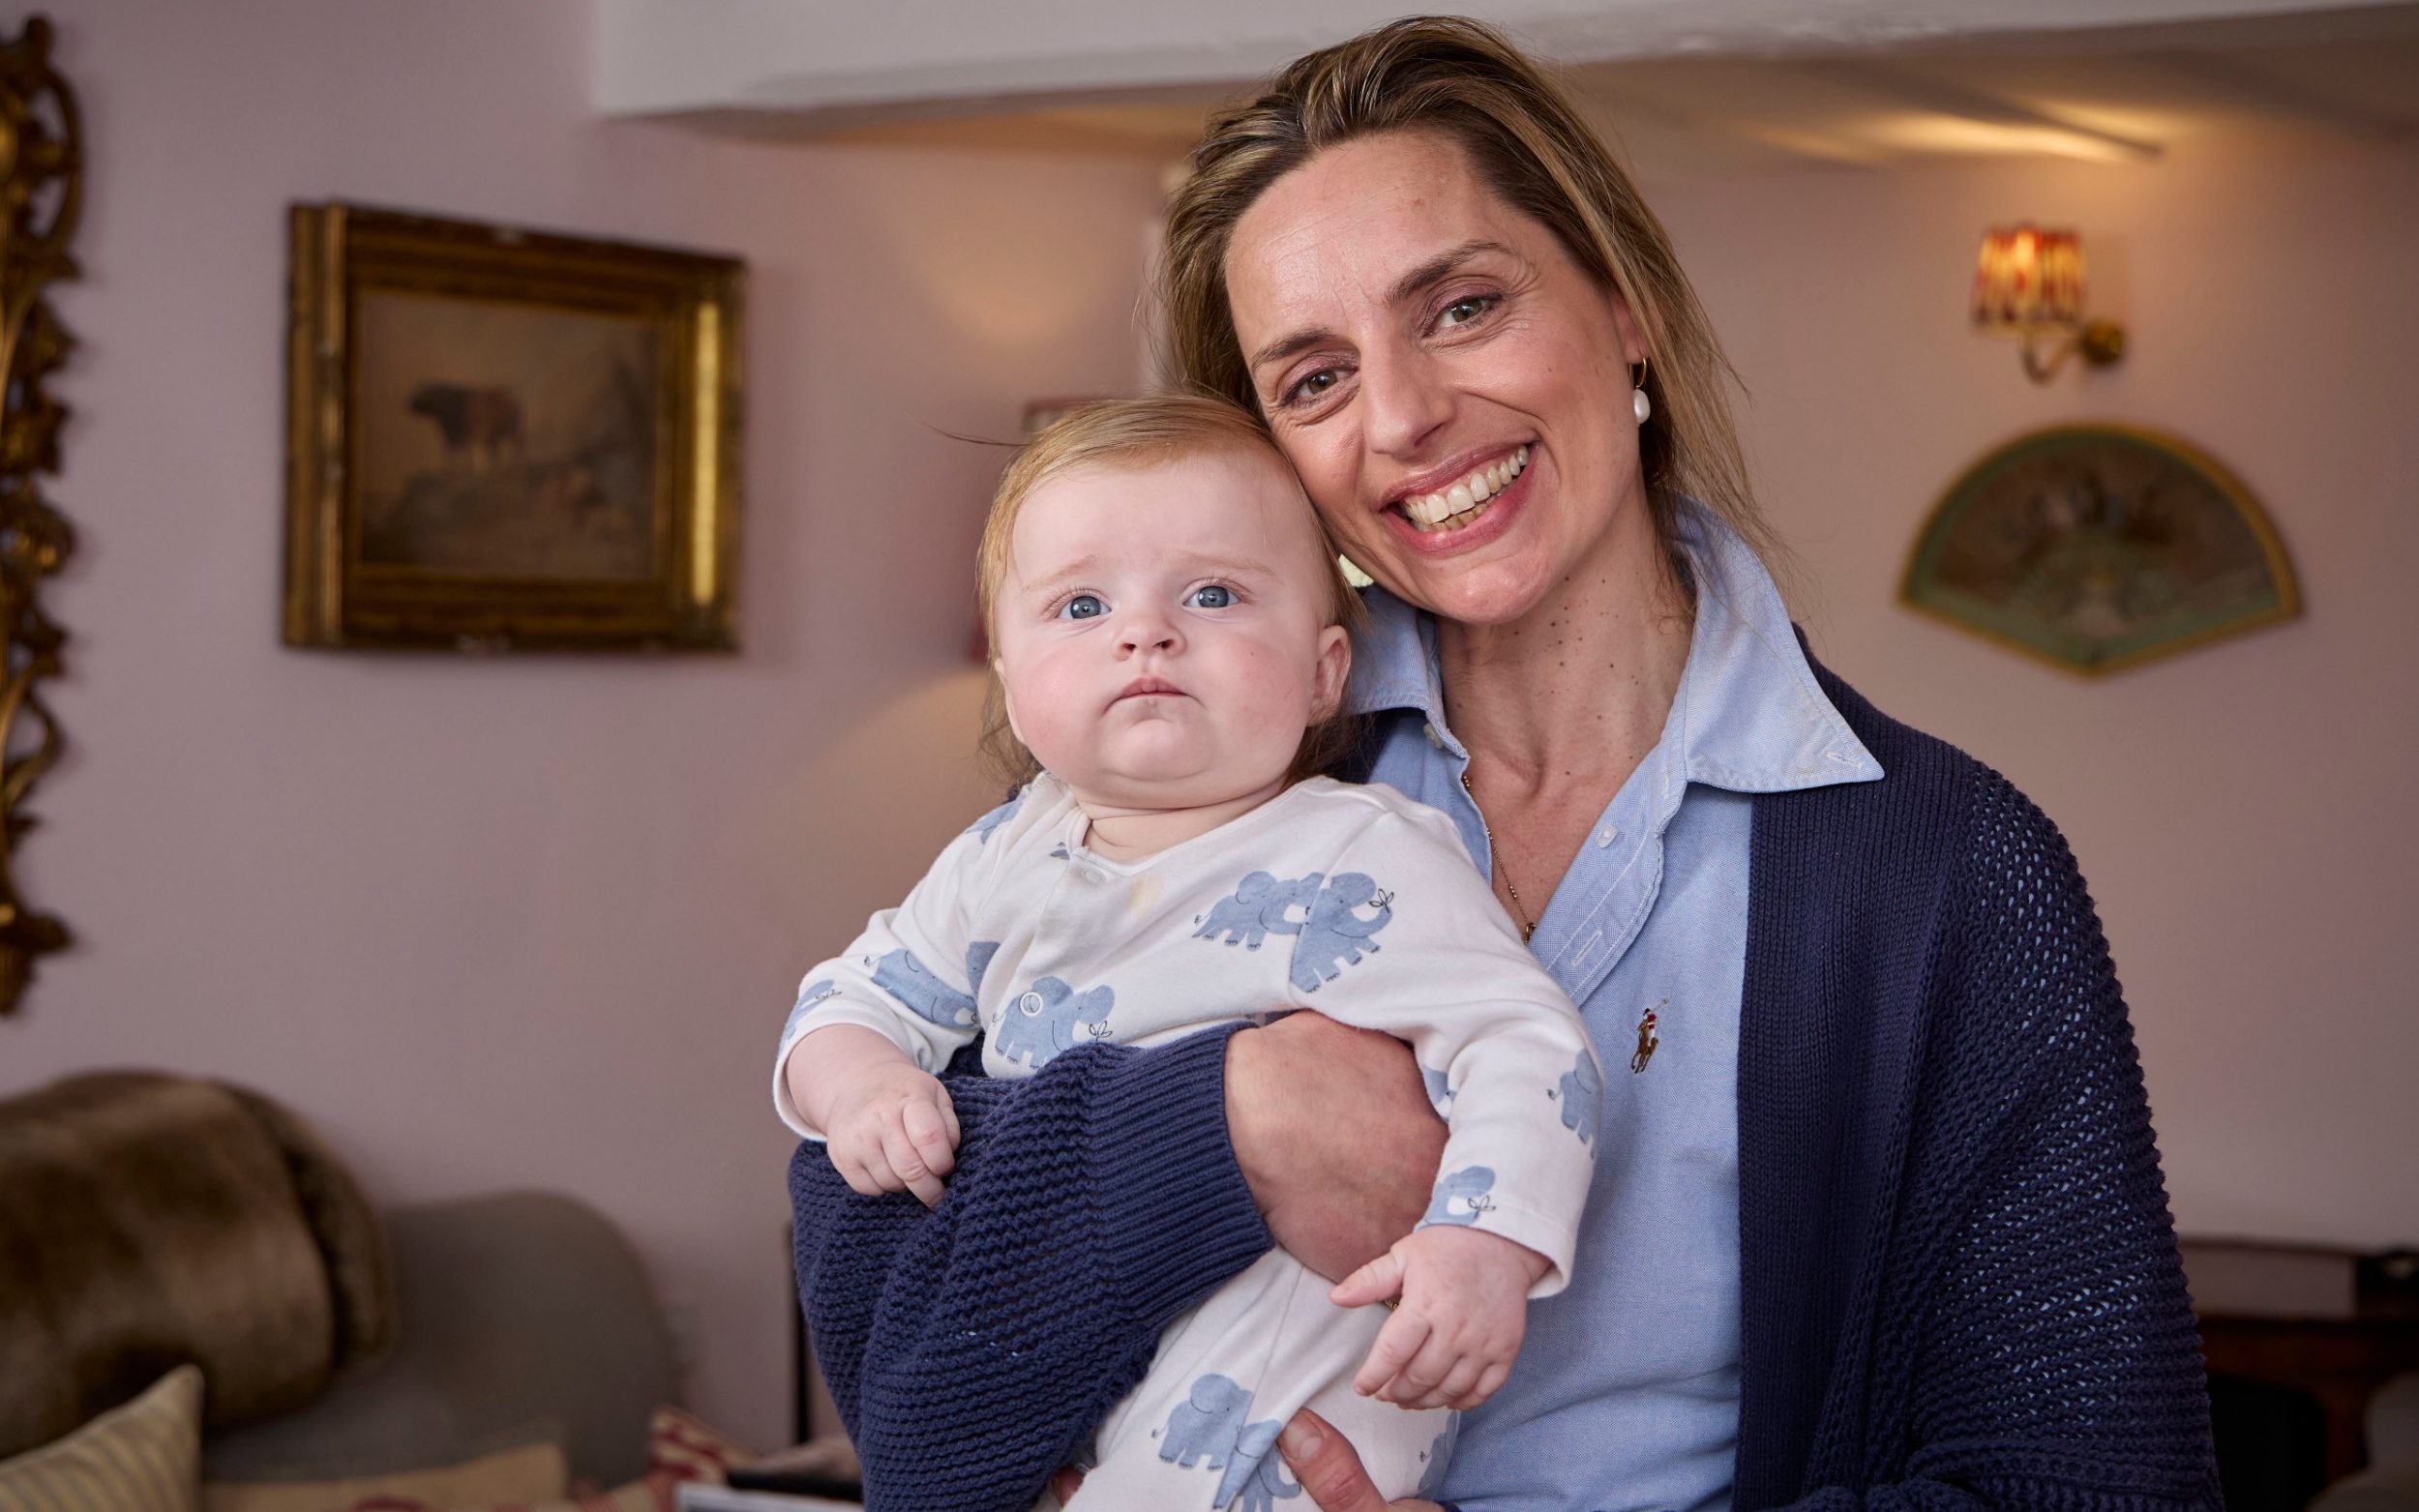 exclusive gina ford interview: ‘i’ve never advised parents to let babies cry it out’